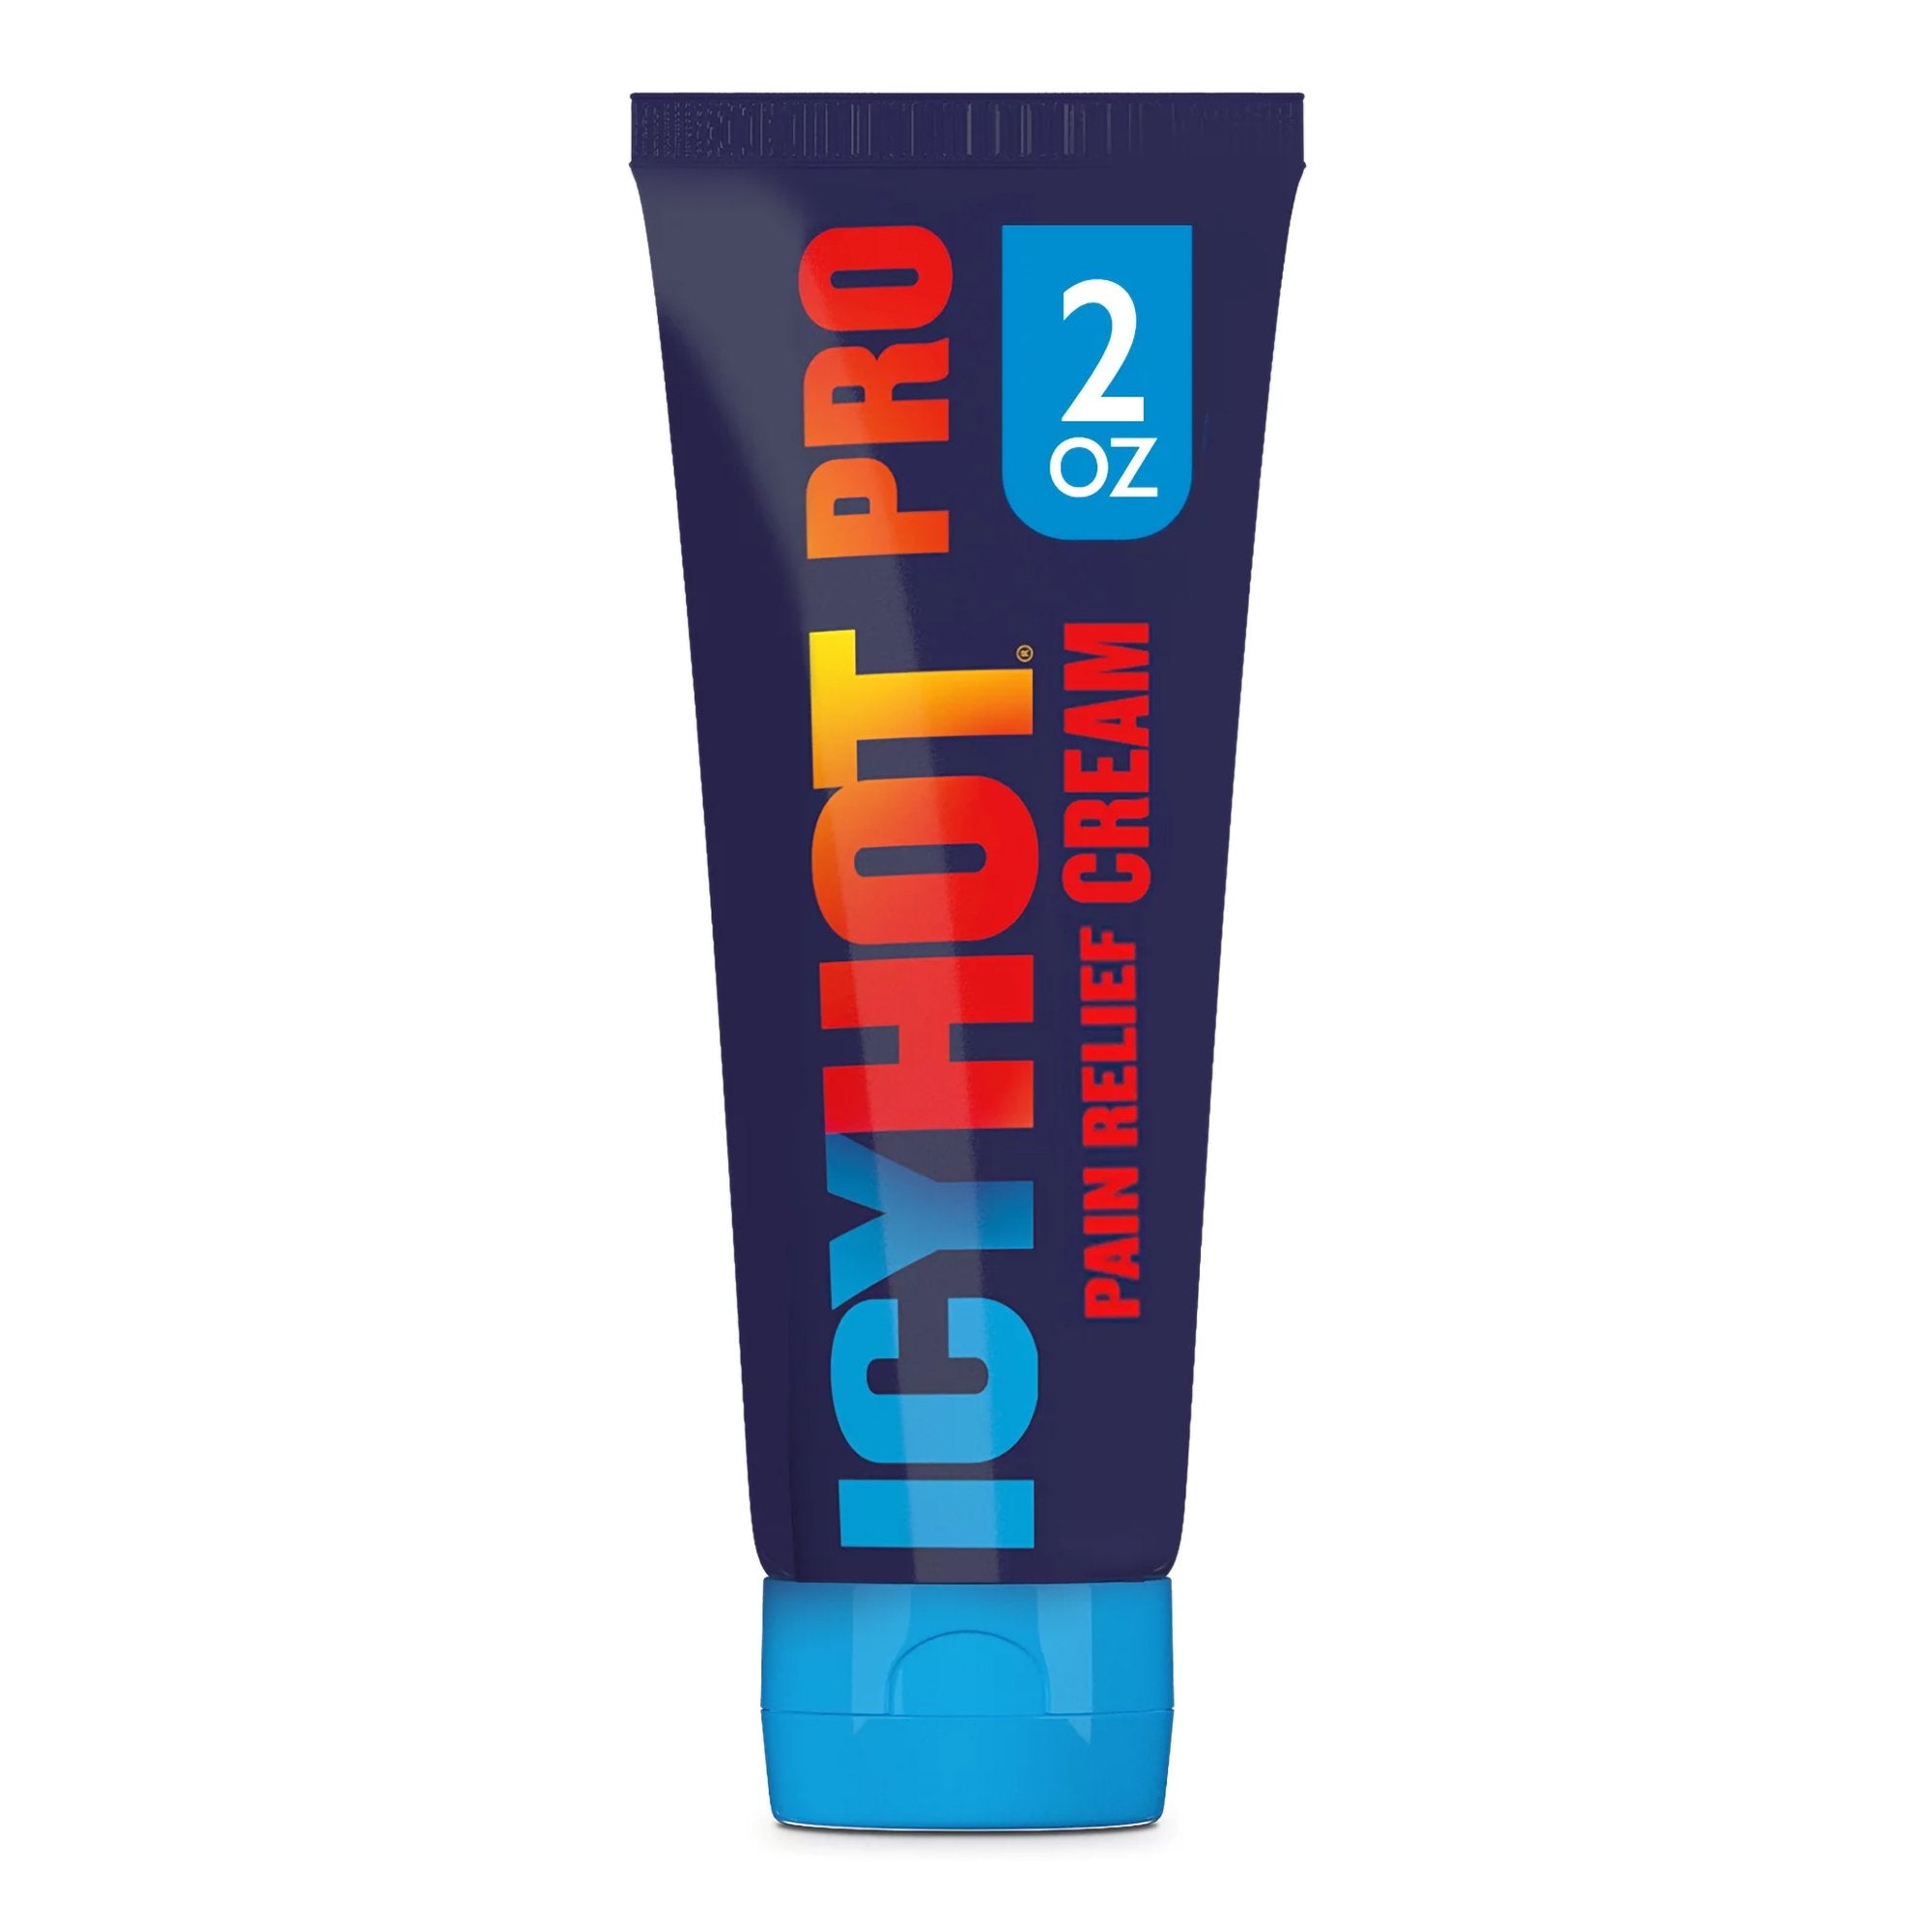 Topical Pain Relief Icy Hot® Cream 2 oz.